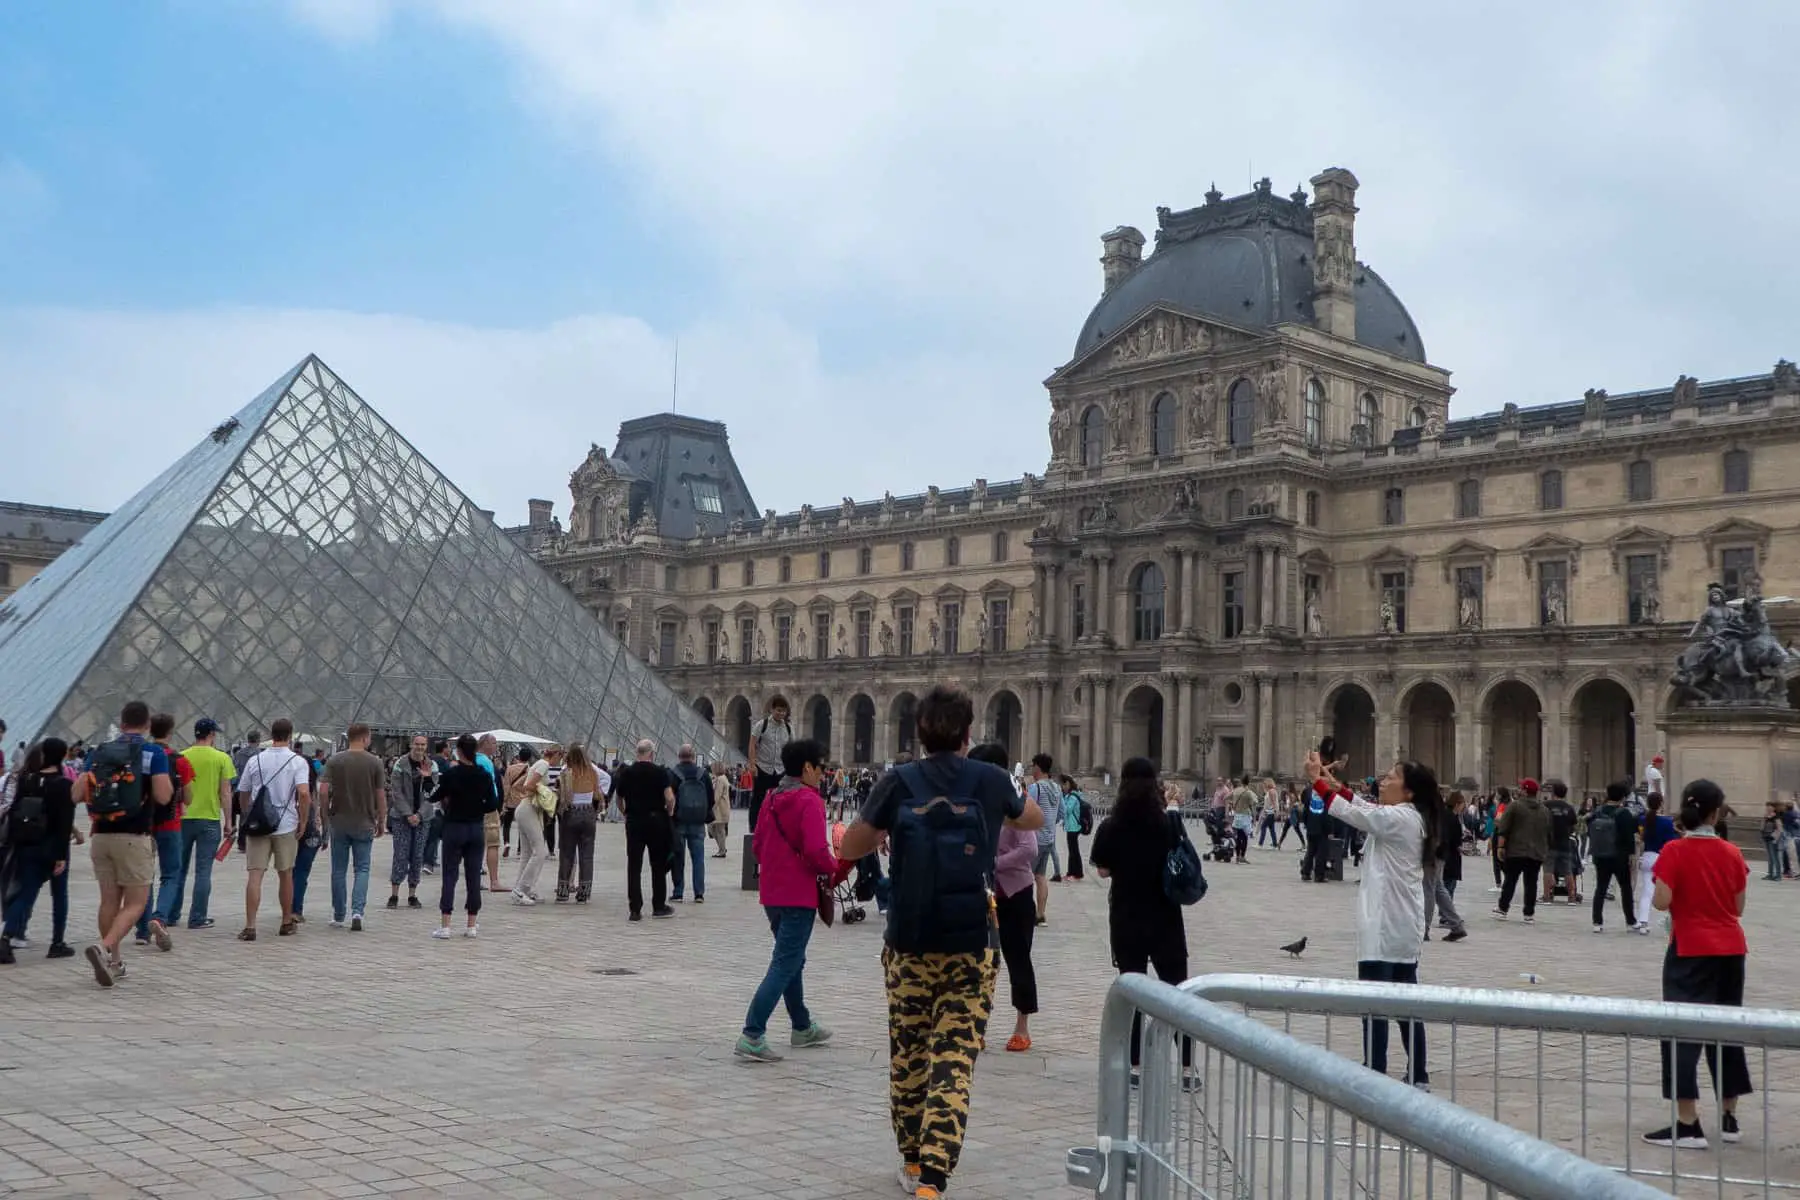 People outside the Louvre